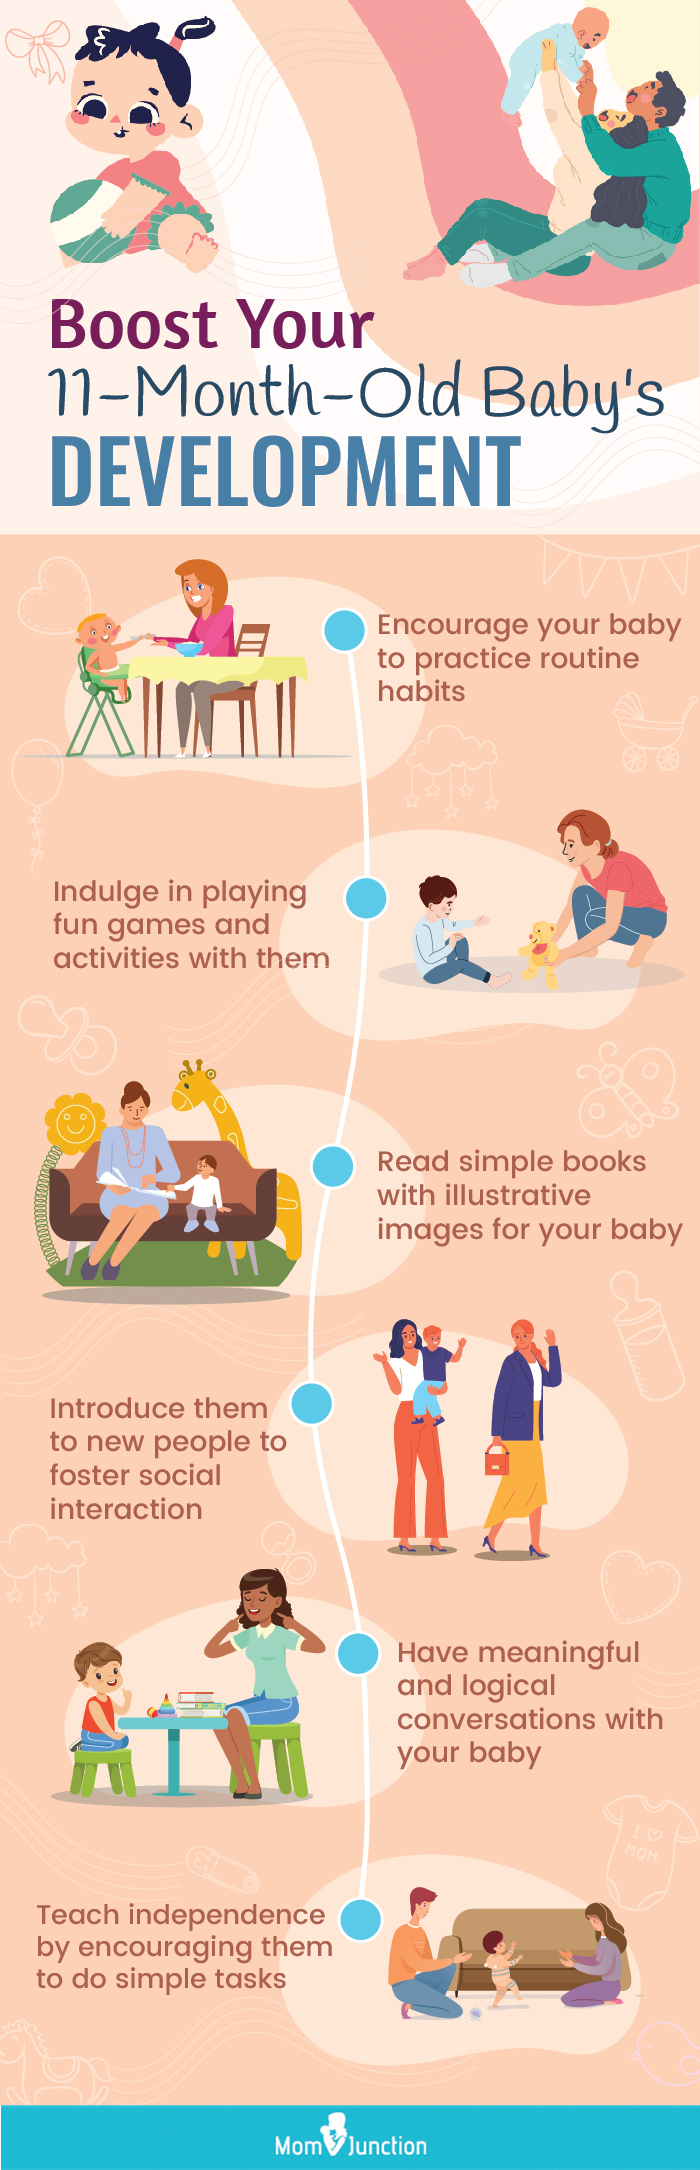 tips to promote the development of your 11 month old [infographic]